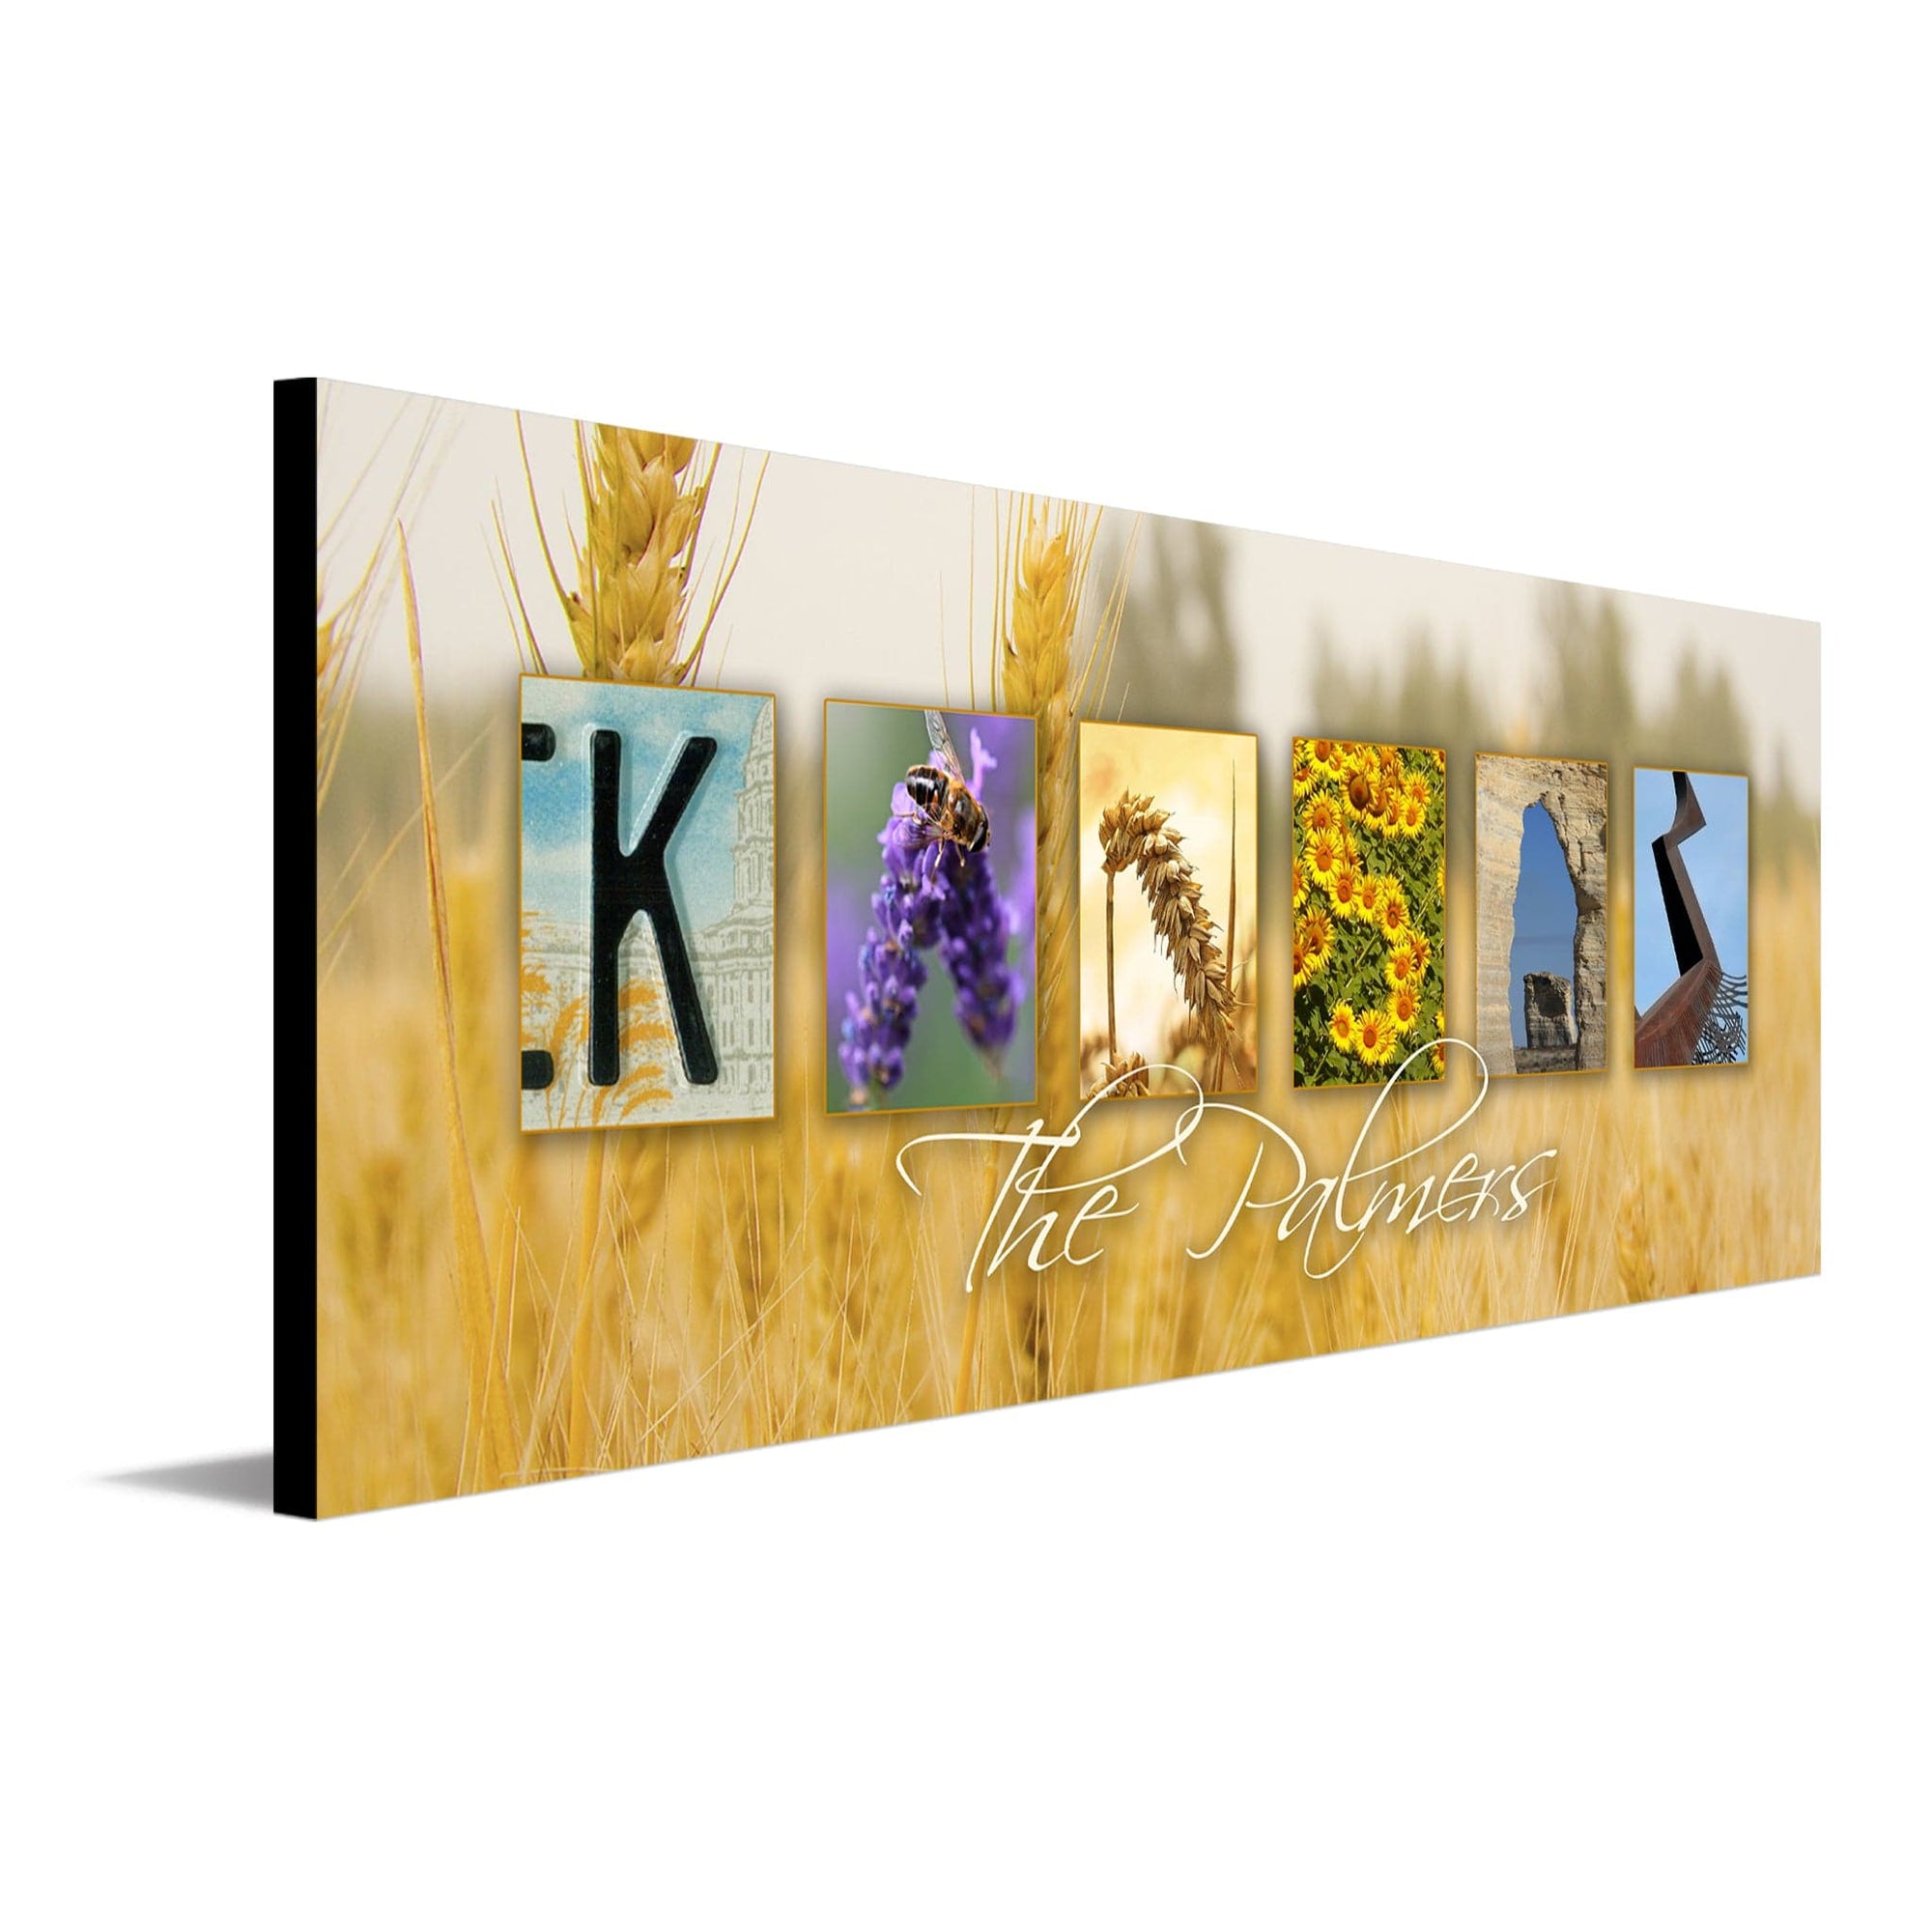 Kansas wall art with a wheat field and images from around the state to spell the word Kansas - Personal Prints